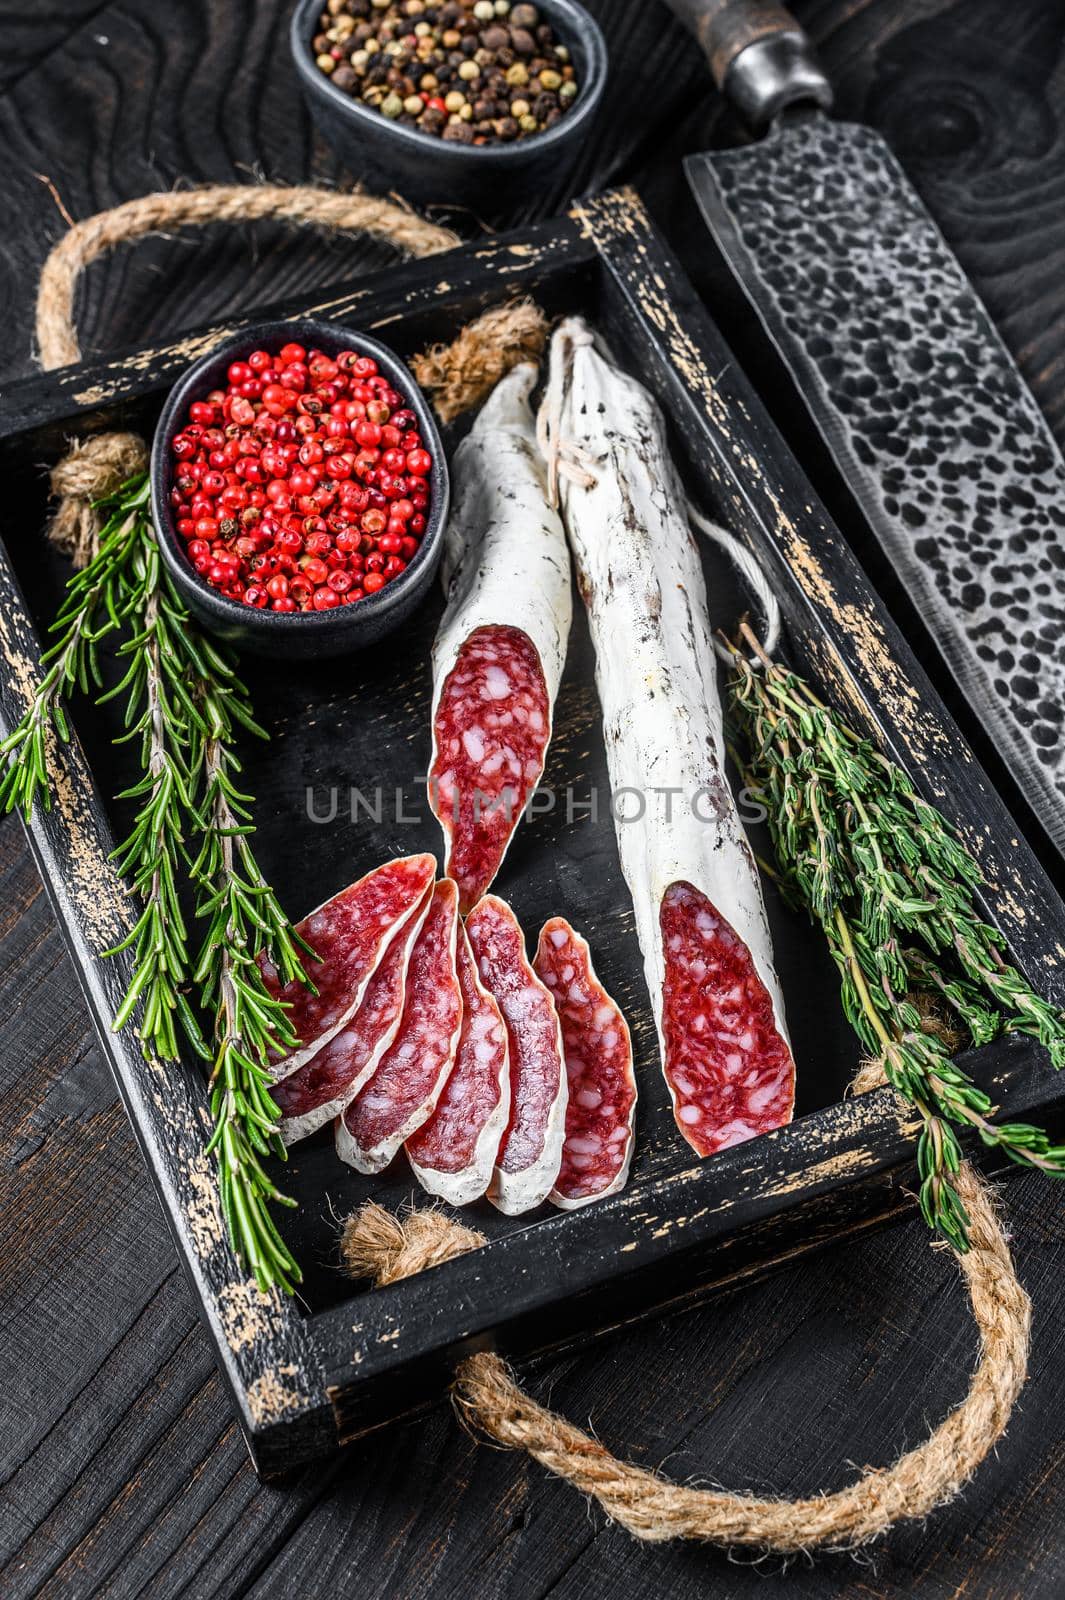 Fuet Salami sausage slices with thyme and rosemary in a wooden tray. Black wooden background. Top view.